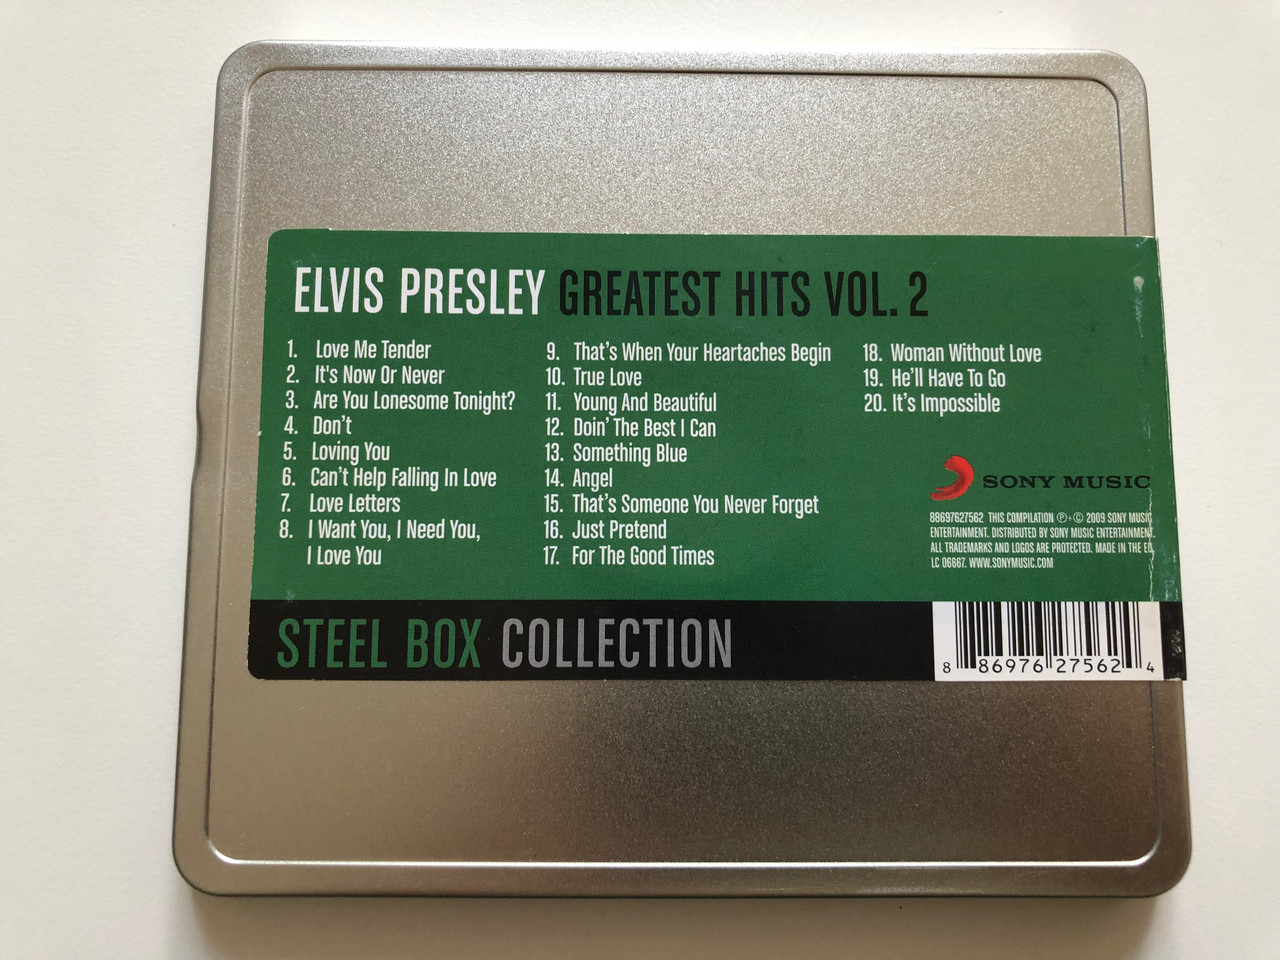 https://cdn10.bigcommerce.com/s-62bdpkt7pb/products/31019/images/182834/Elvis_Presley_Greatest_Hits_Vol.2_Steel_Box_Collection_Sony_Music_Audio_CD_2009_88697627562_5__61445.1624947748.1280.1280.JPG?c=2